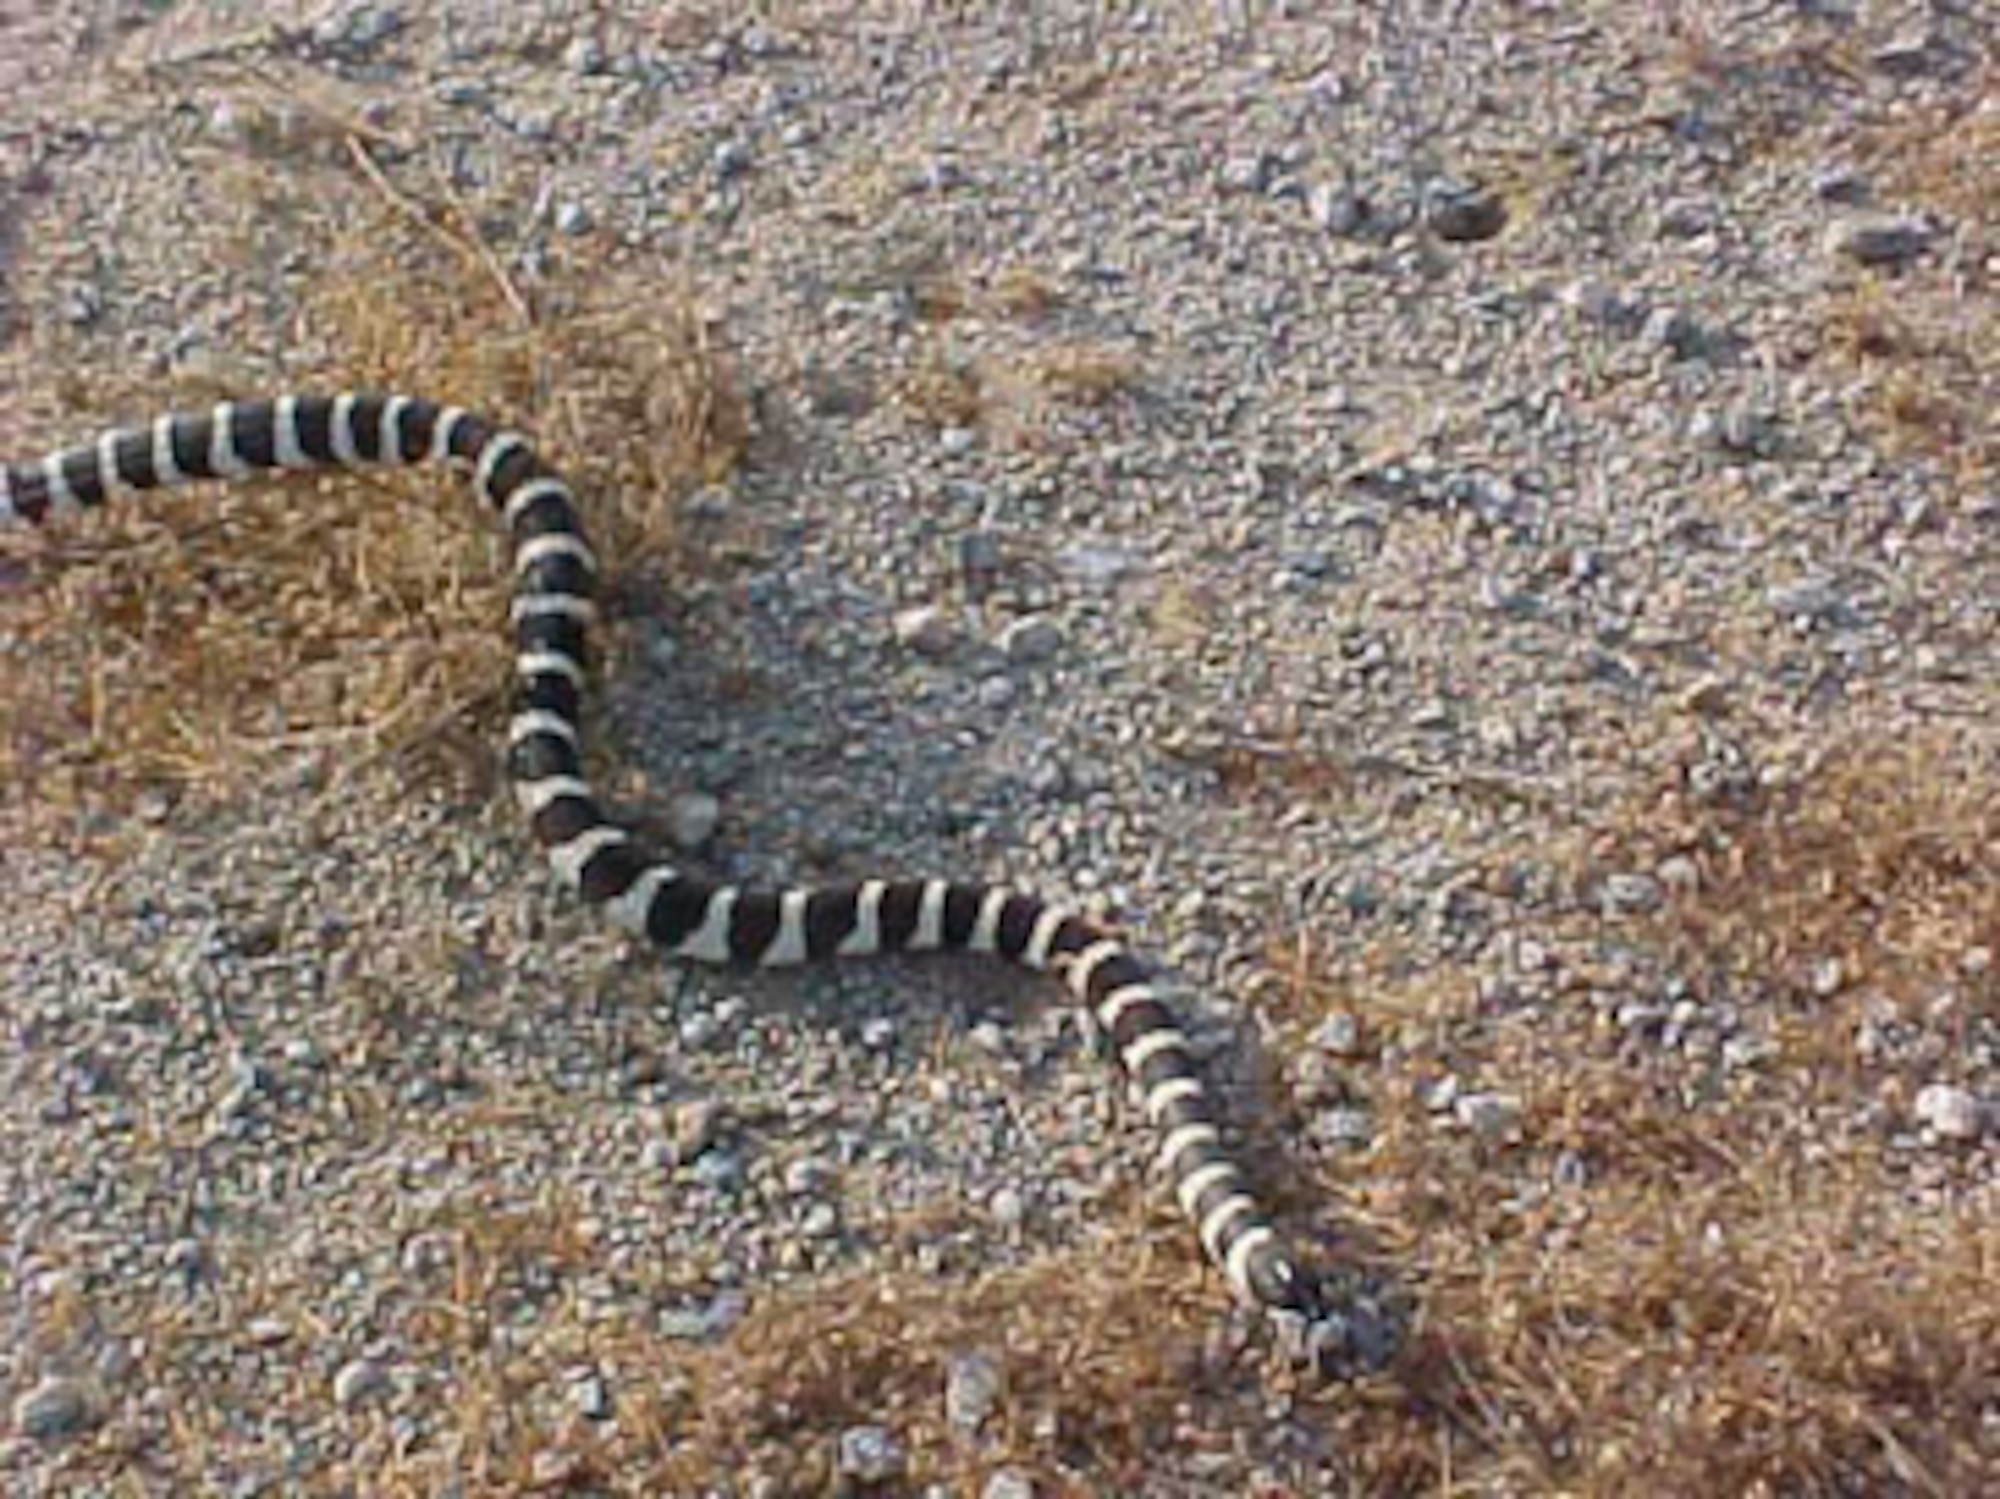 The California king snake is one of the many reptiles common to the Mojave Desert area. Other snakes seen here are the Mojave green rattlesnake, the sidewinder rattlesnake and the gopher snake. (Photo by Mark Bratton)